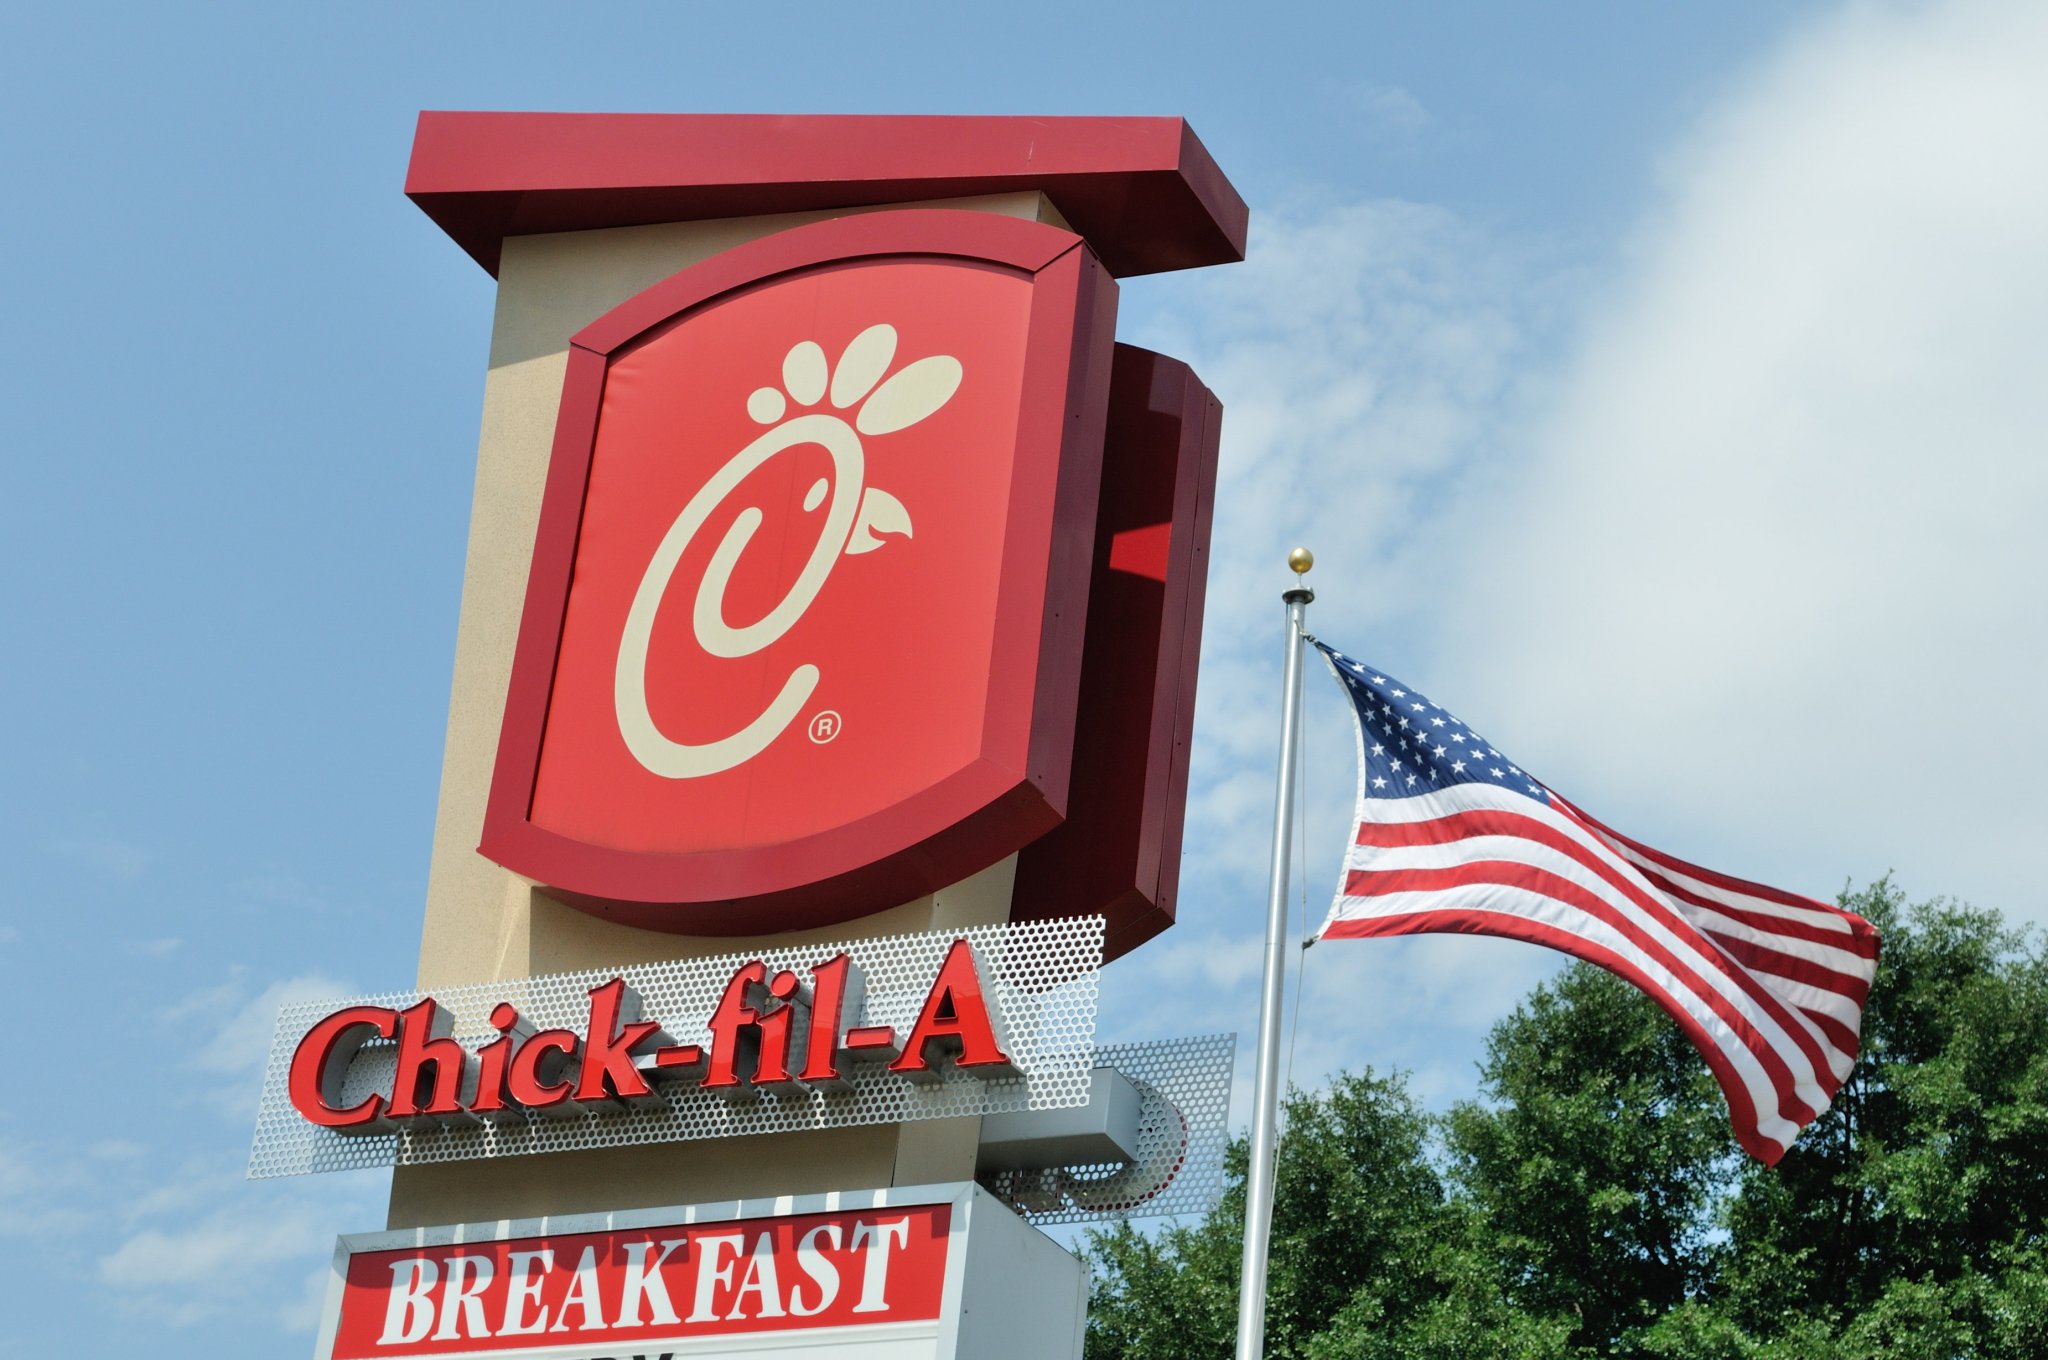 Wisconsin Chick-fil-A employee gifts car to colleague who was riding bike to work